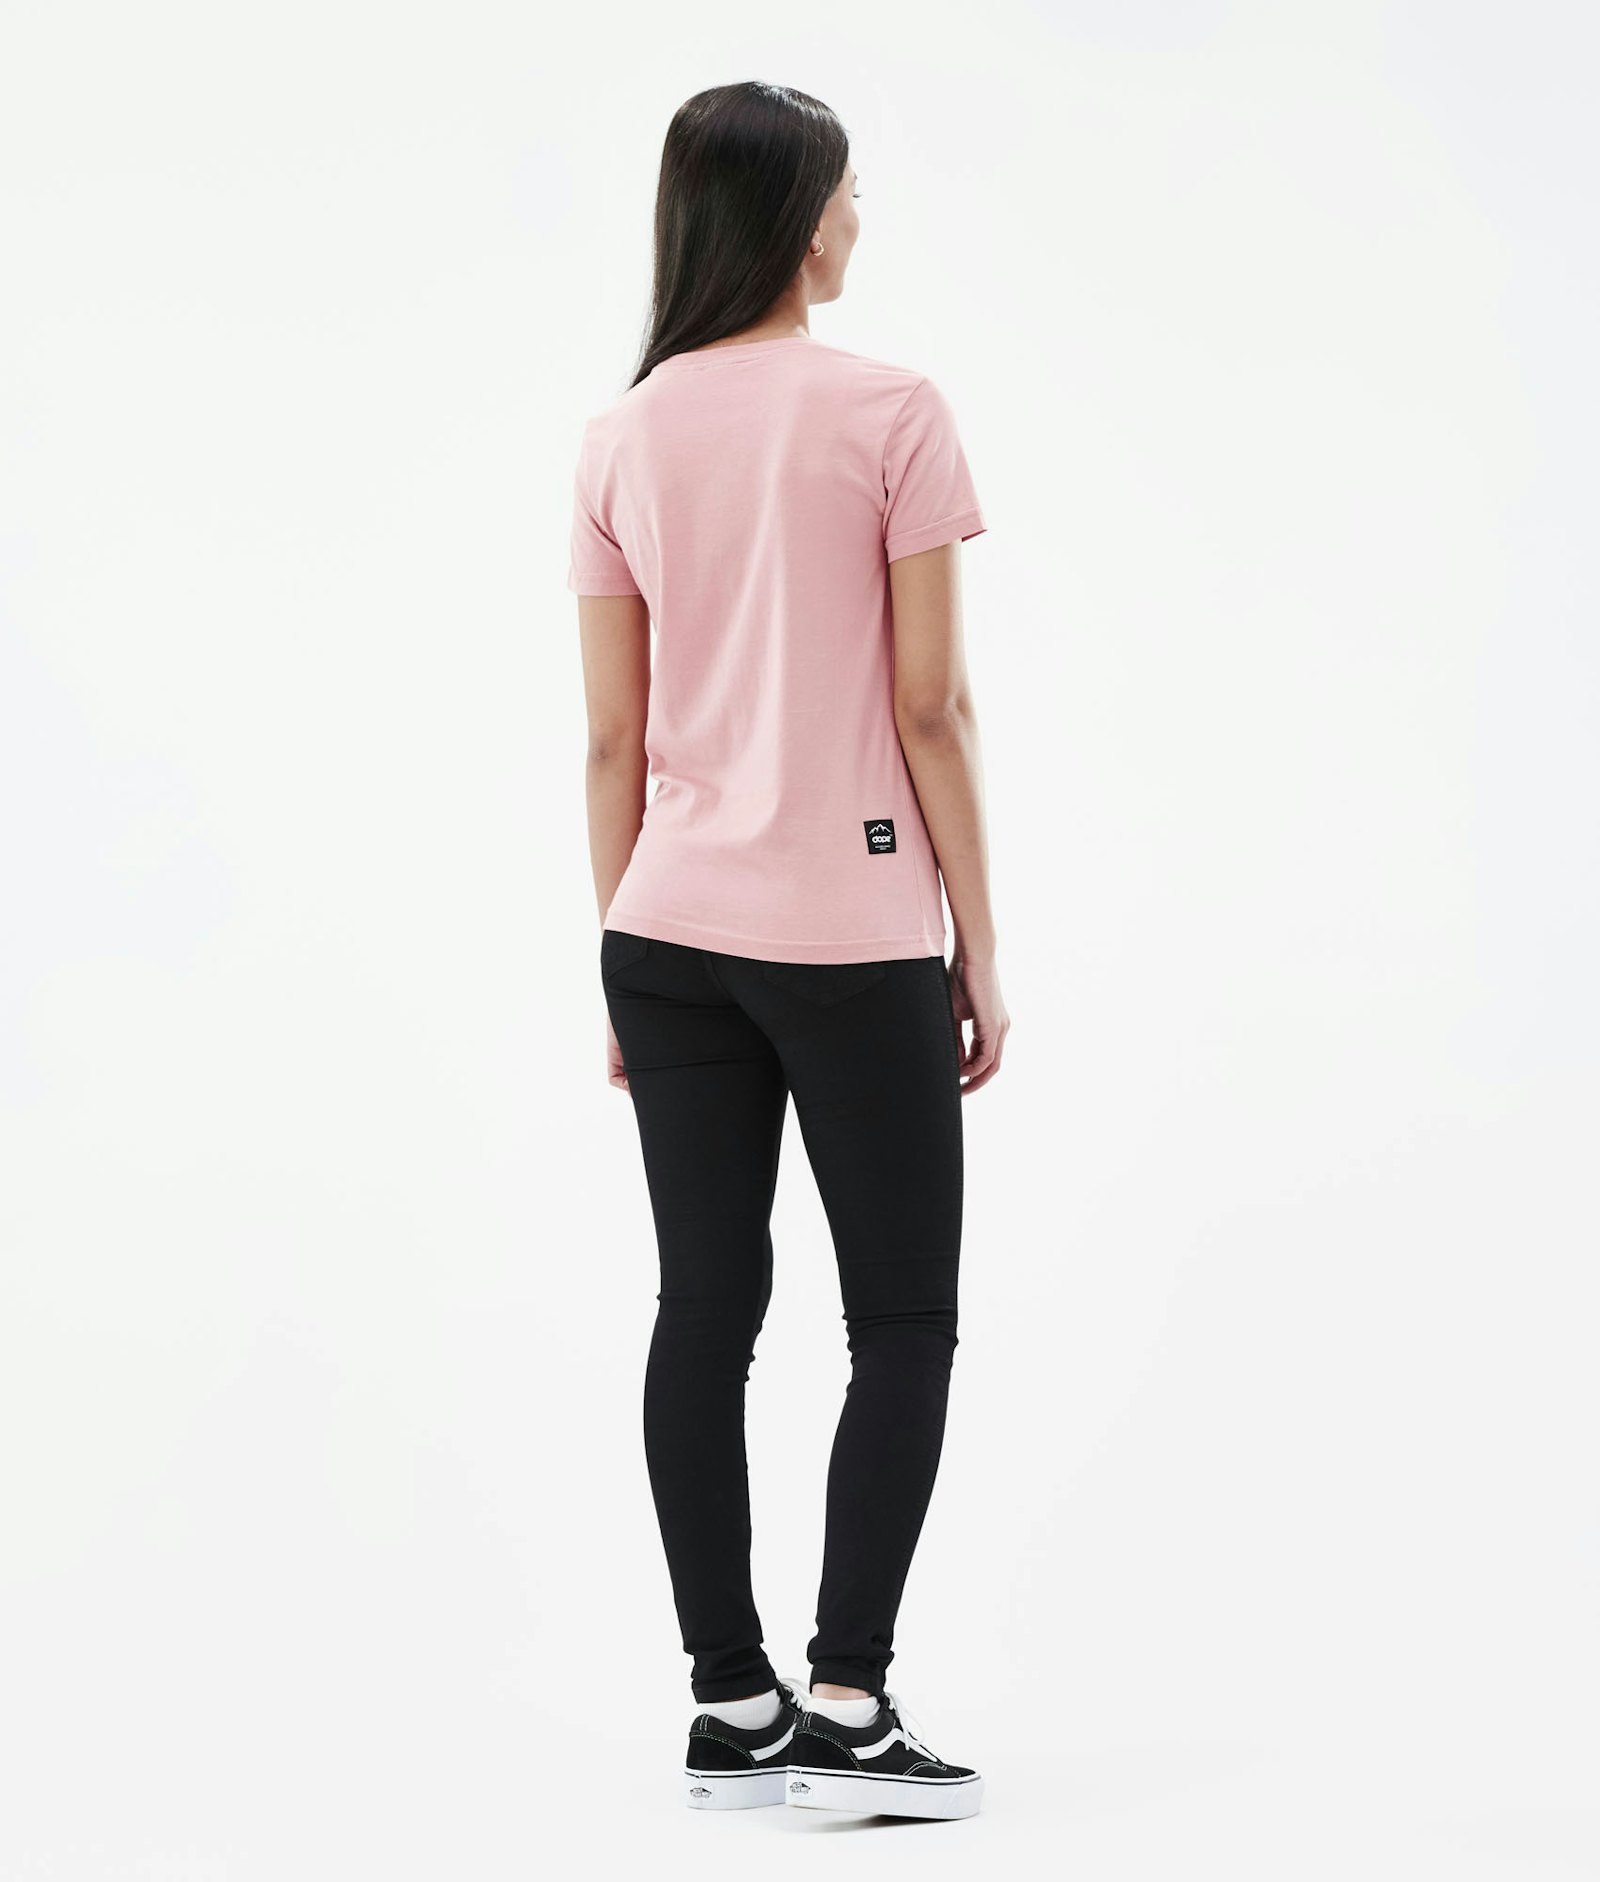 Copain 2X-UP Small T-shirt Femme Softpink